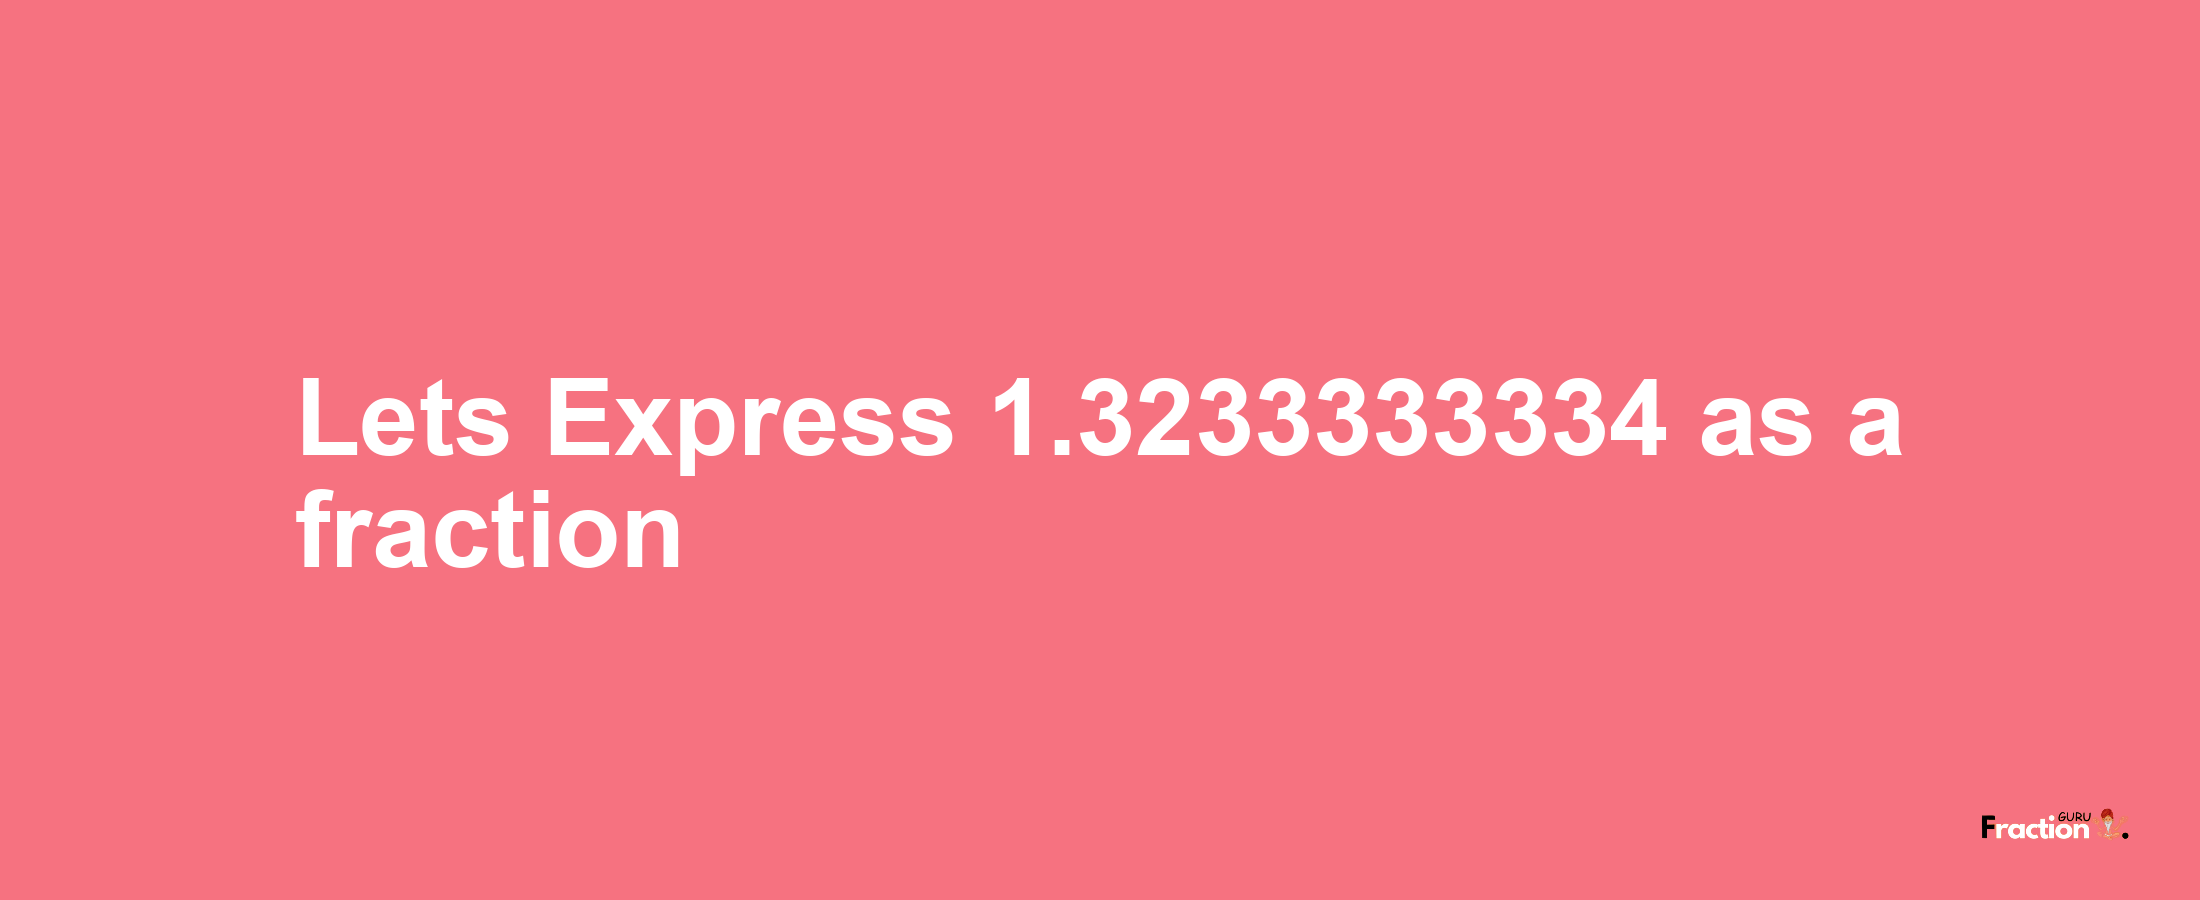 Lets Express 1.3233333334 as afraction